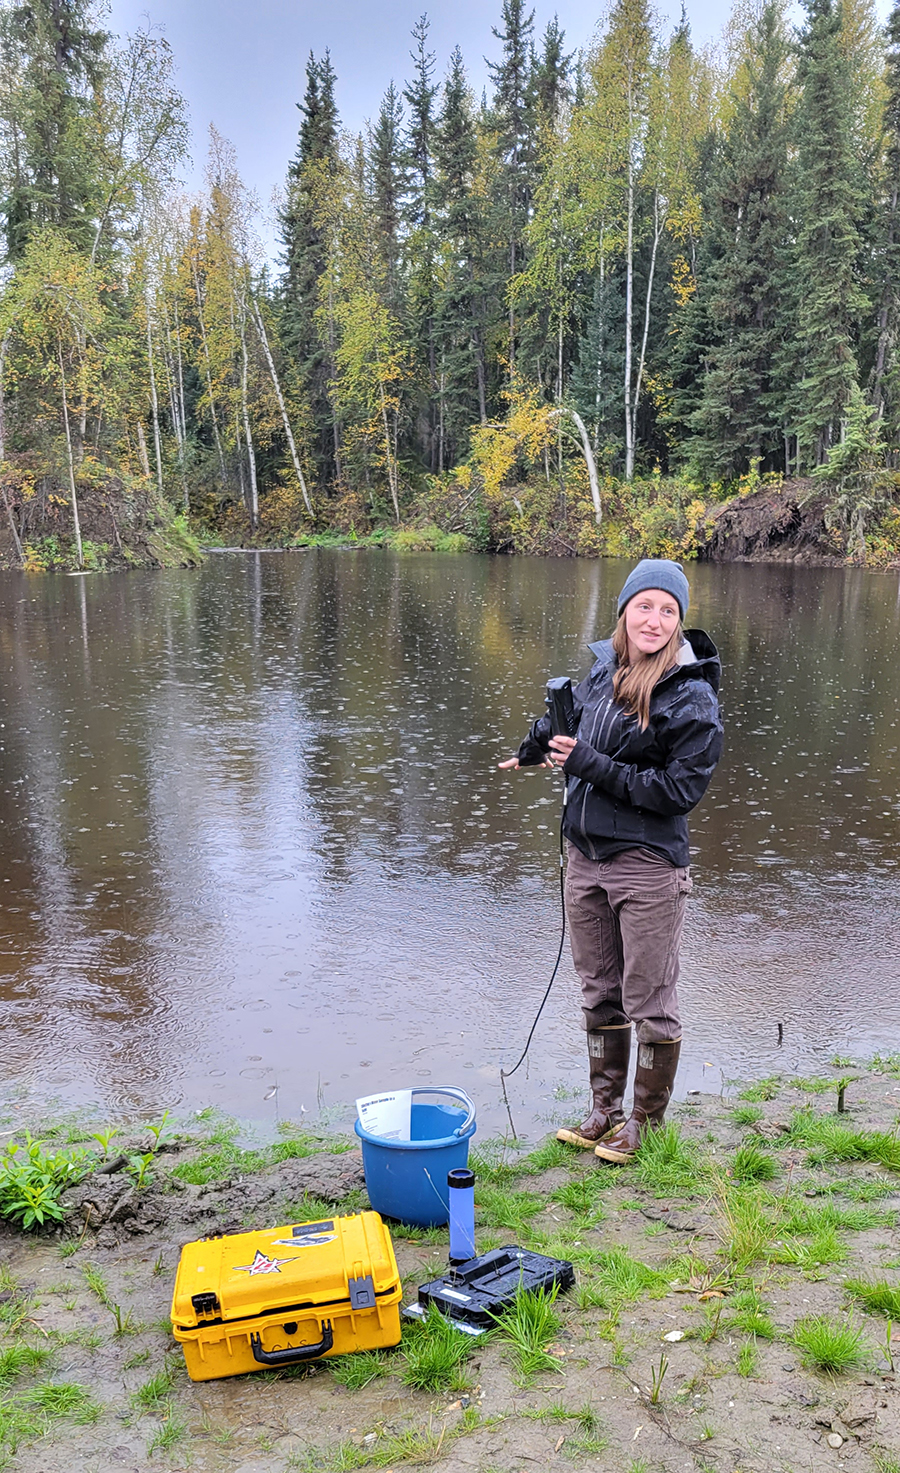 A woman in a jacket and knit cap stands near a body of water with water quality testing equipment in a bright yellow box. 